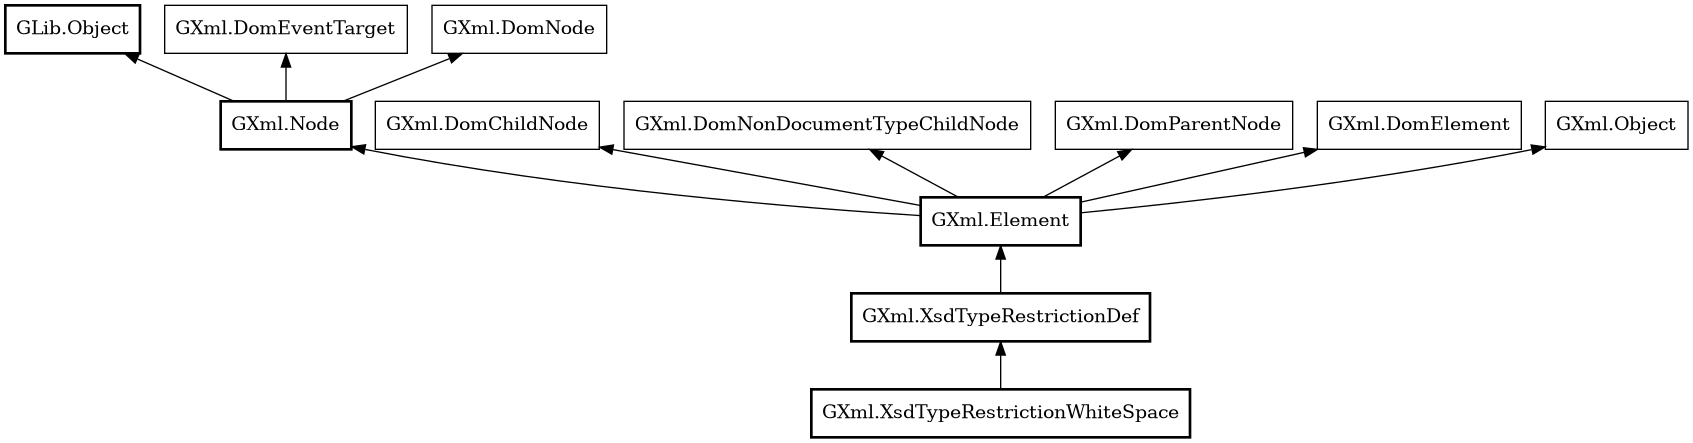 Object hierarchy for XsdTypeRestrictionWhiteSpace